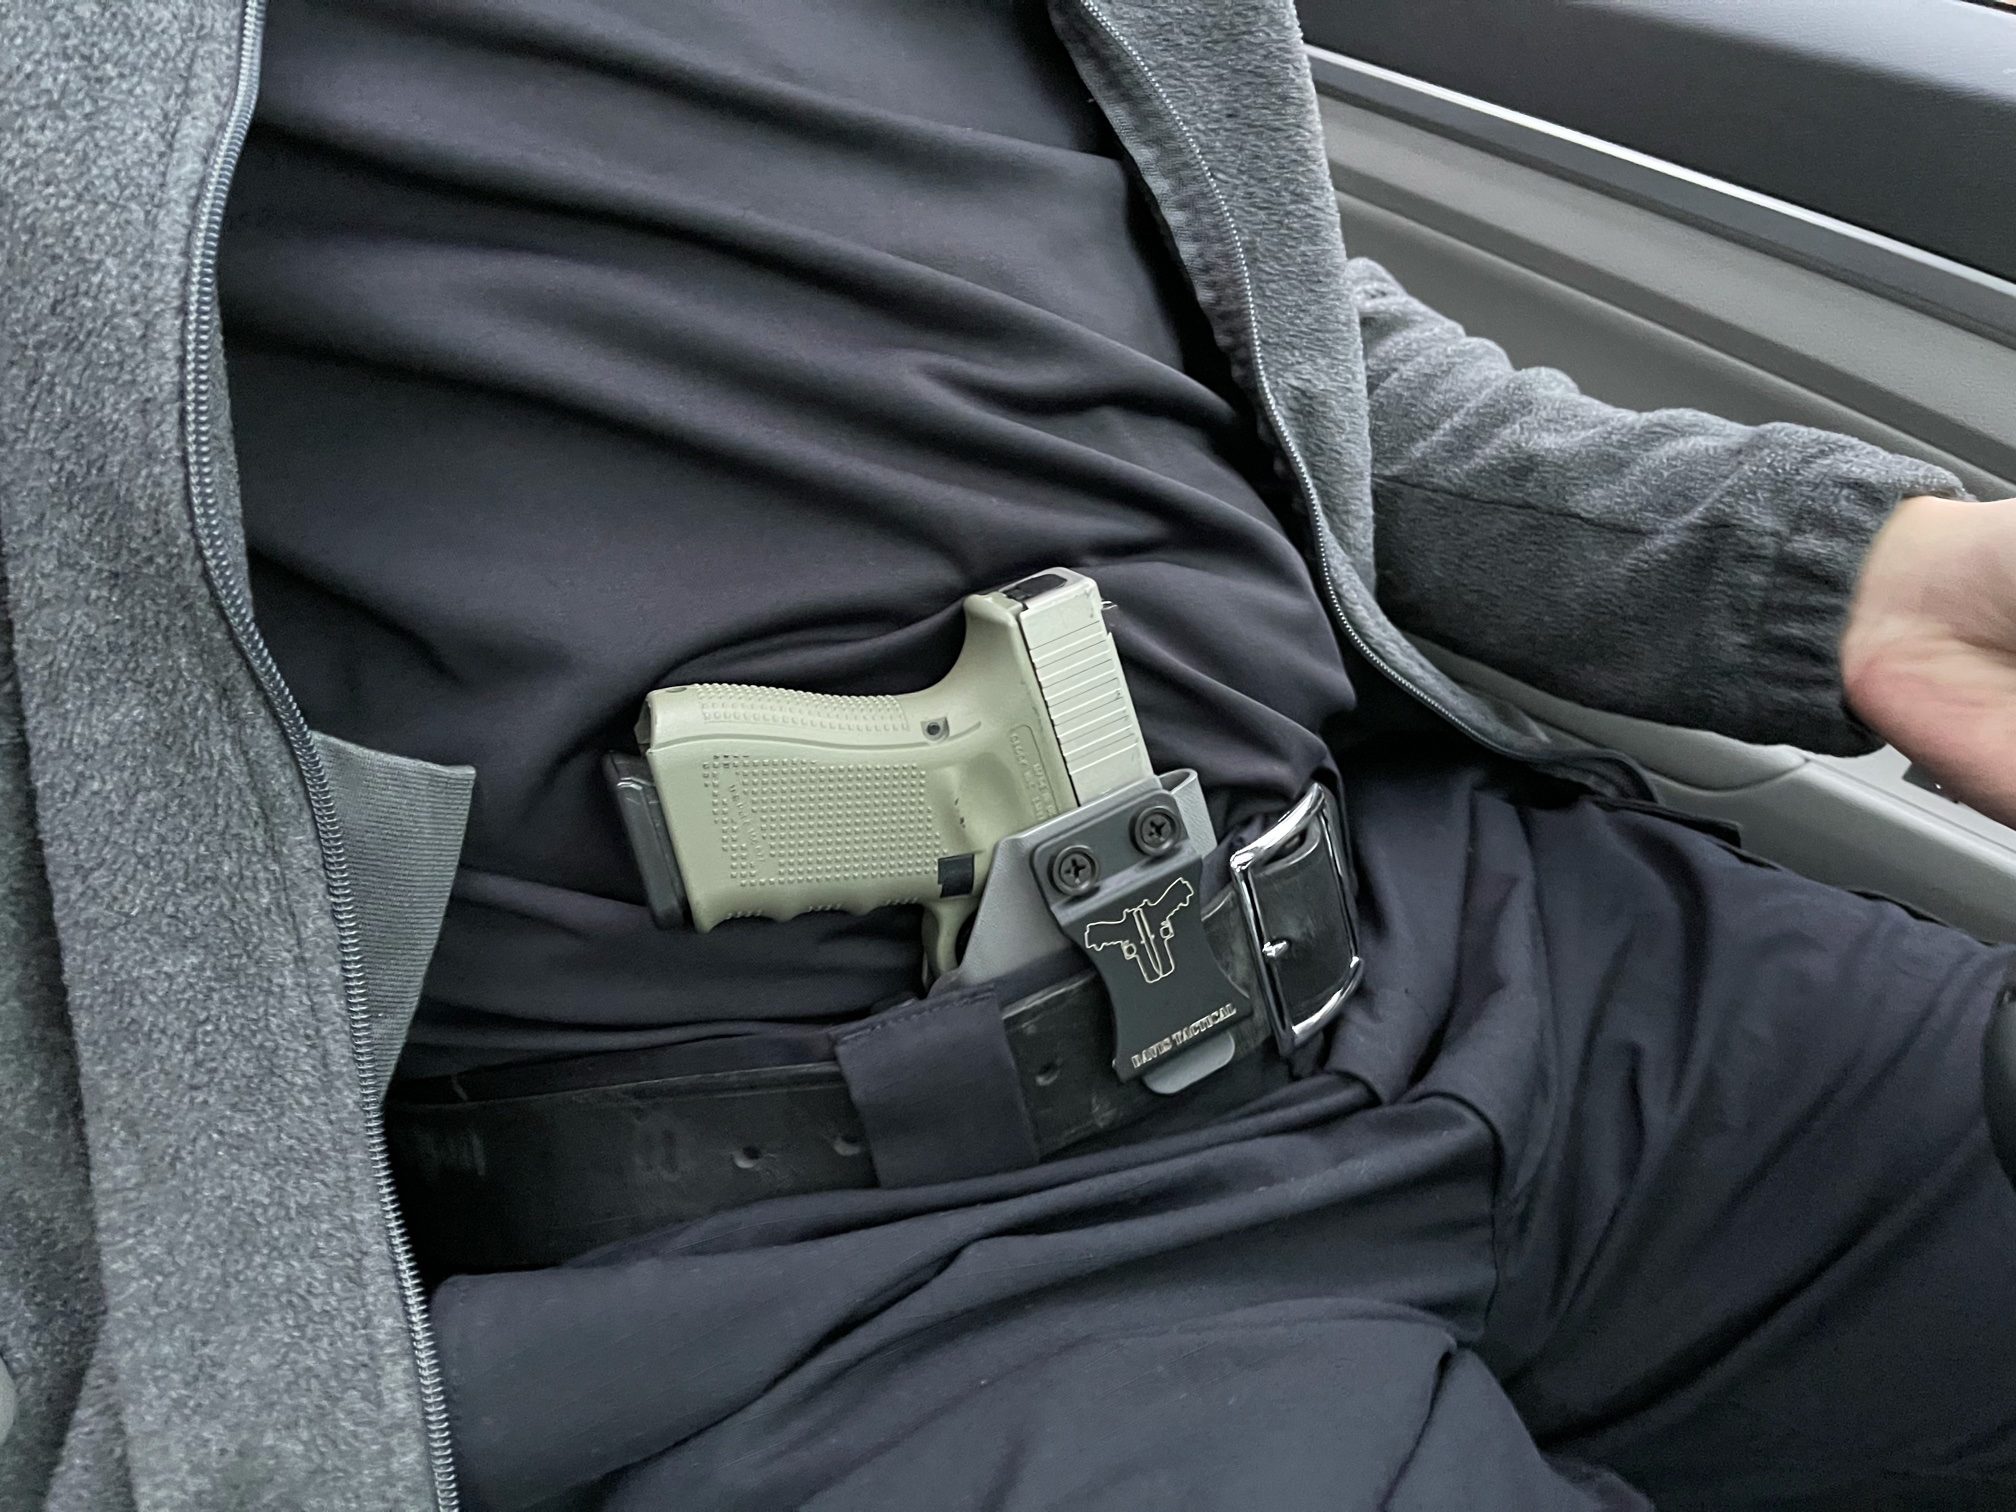 How to Appendix Carry Safely